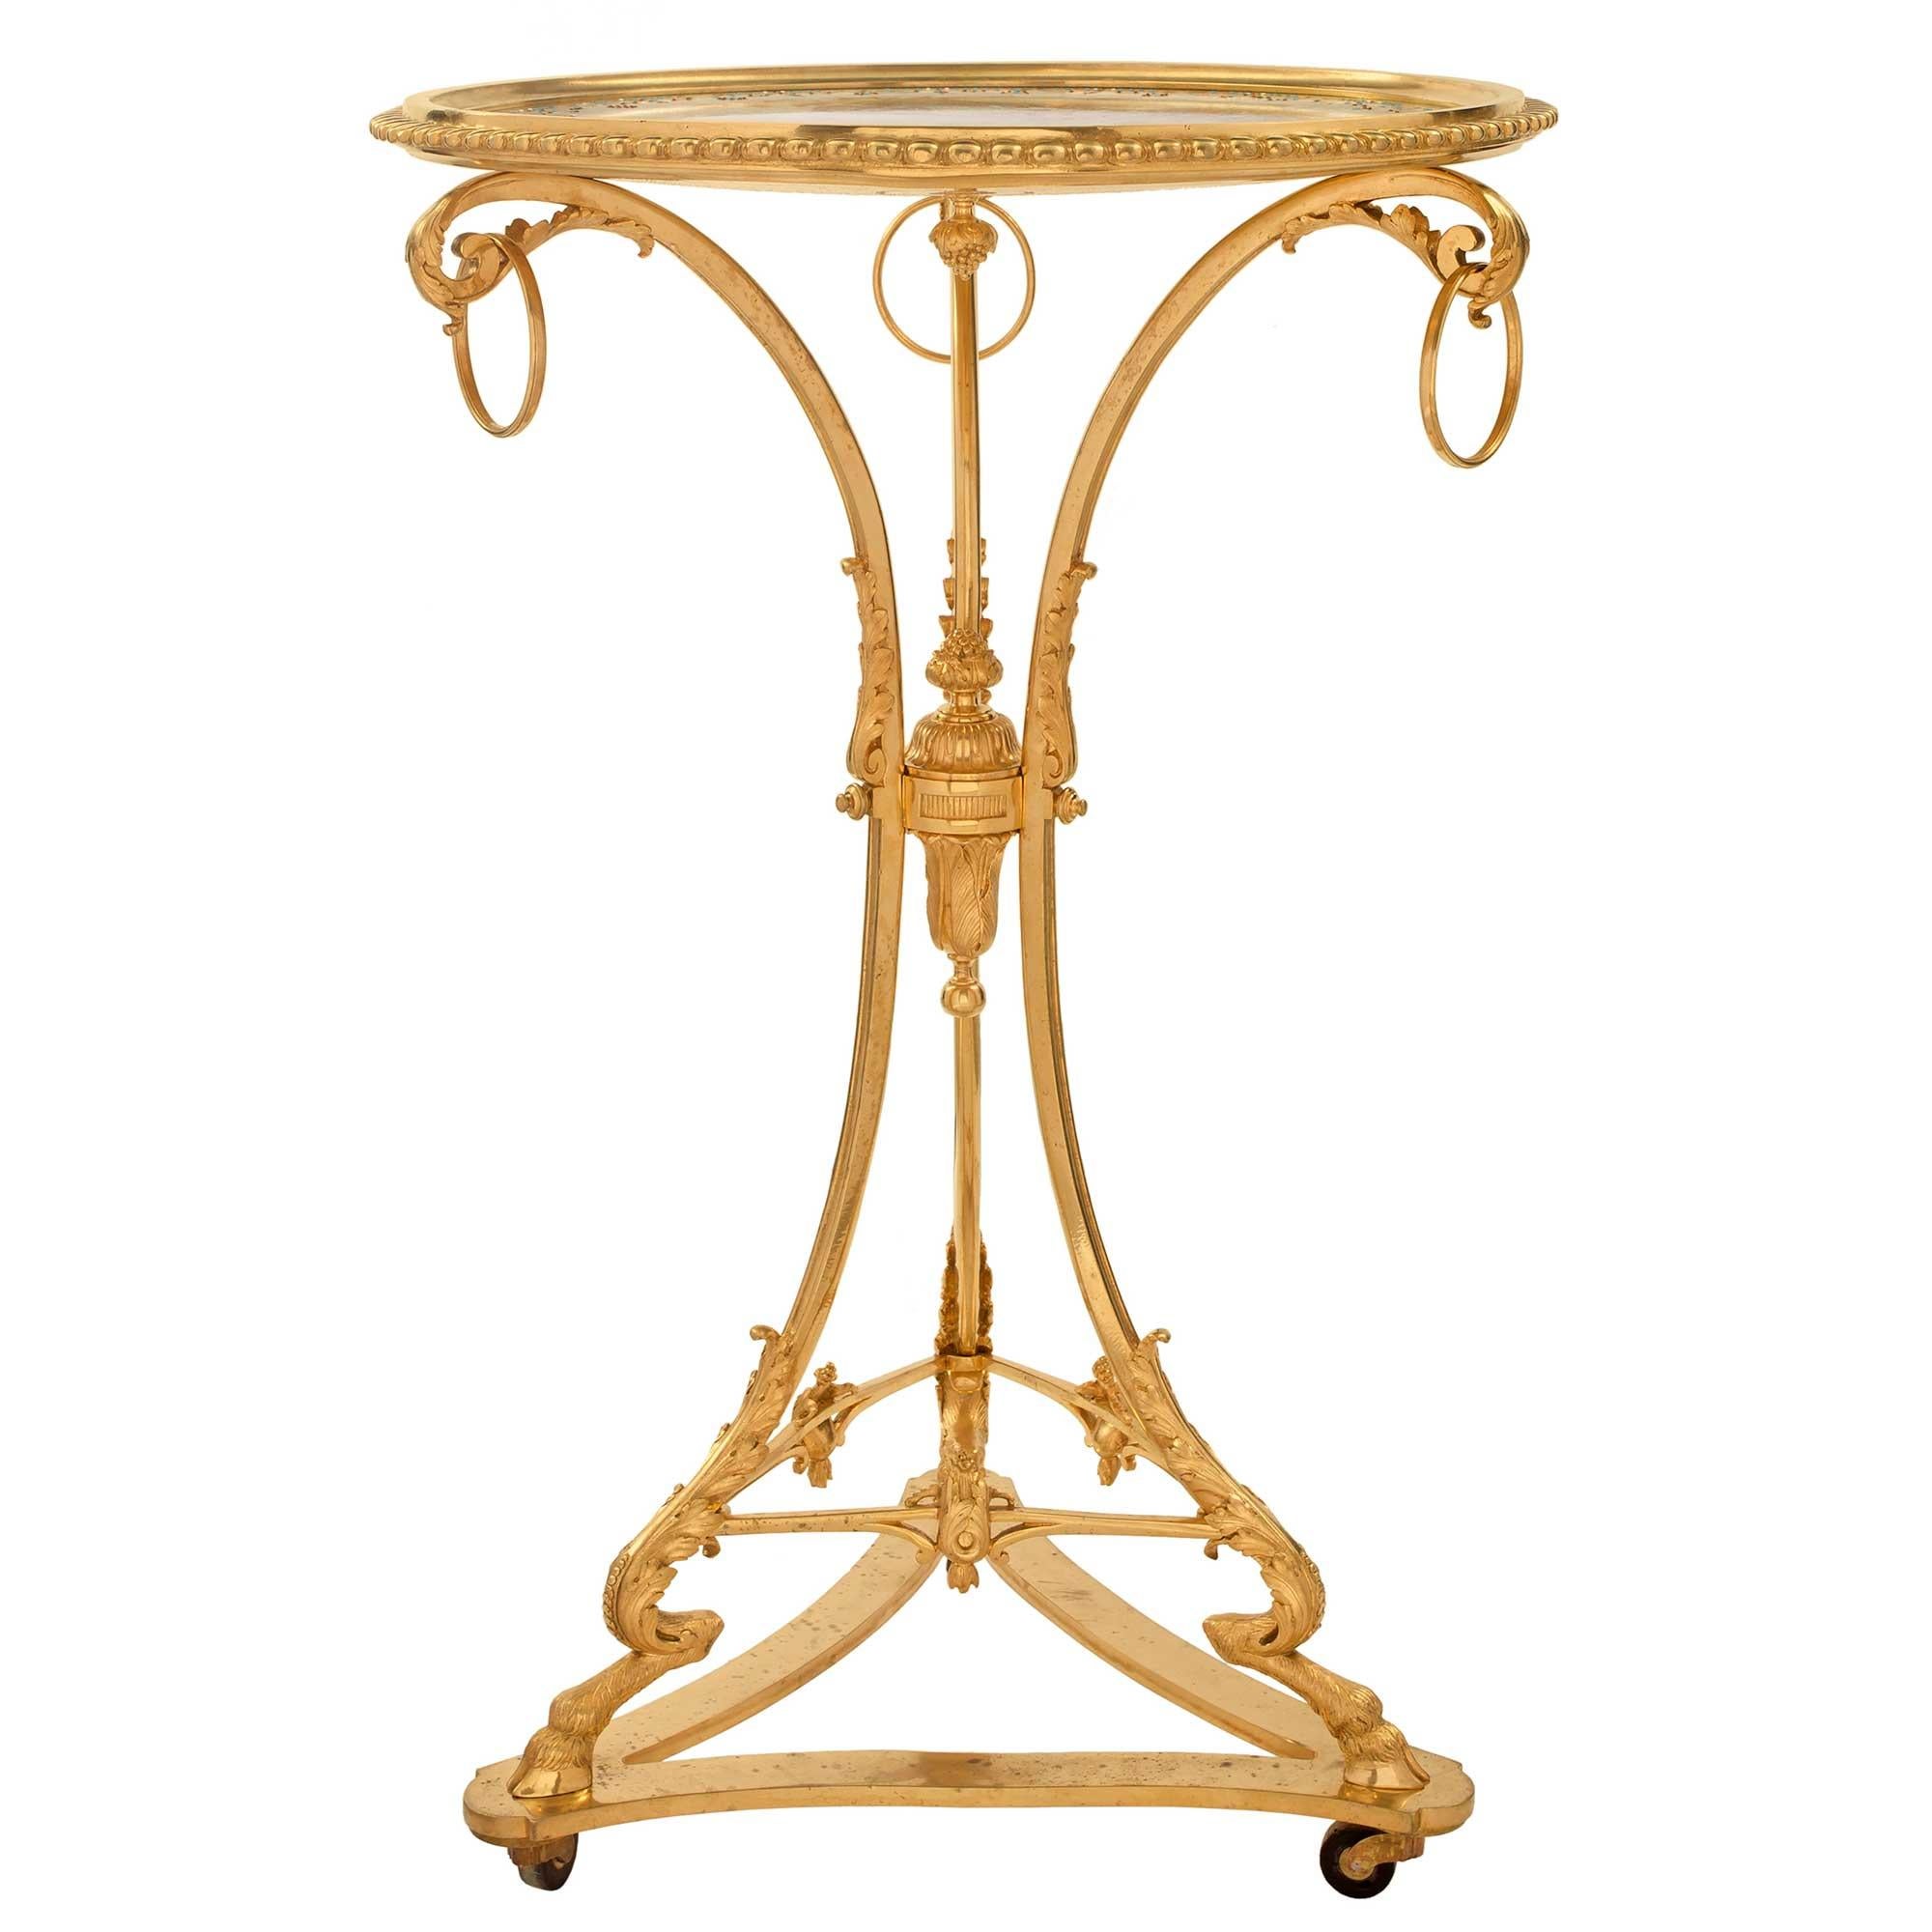 A most decorative French 19th century Louis XVI St. ormolu and porcelain Guéridon. The side table is raised by a triangular base with concave sides and its original casters. The three elegant lightly curved legs display richly chased hoof feet with